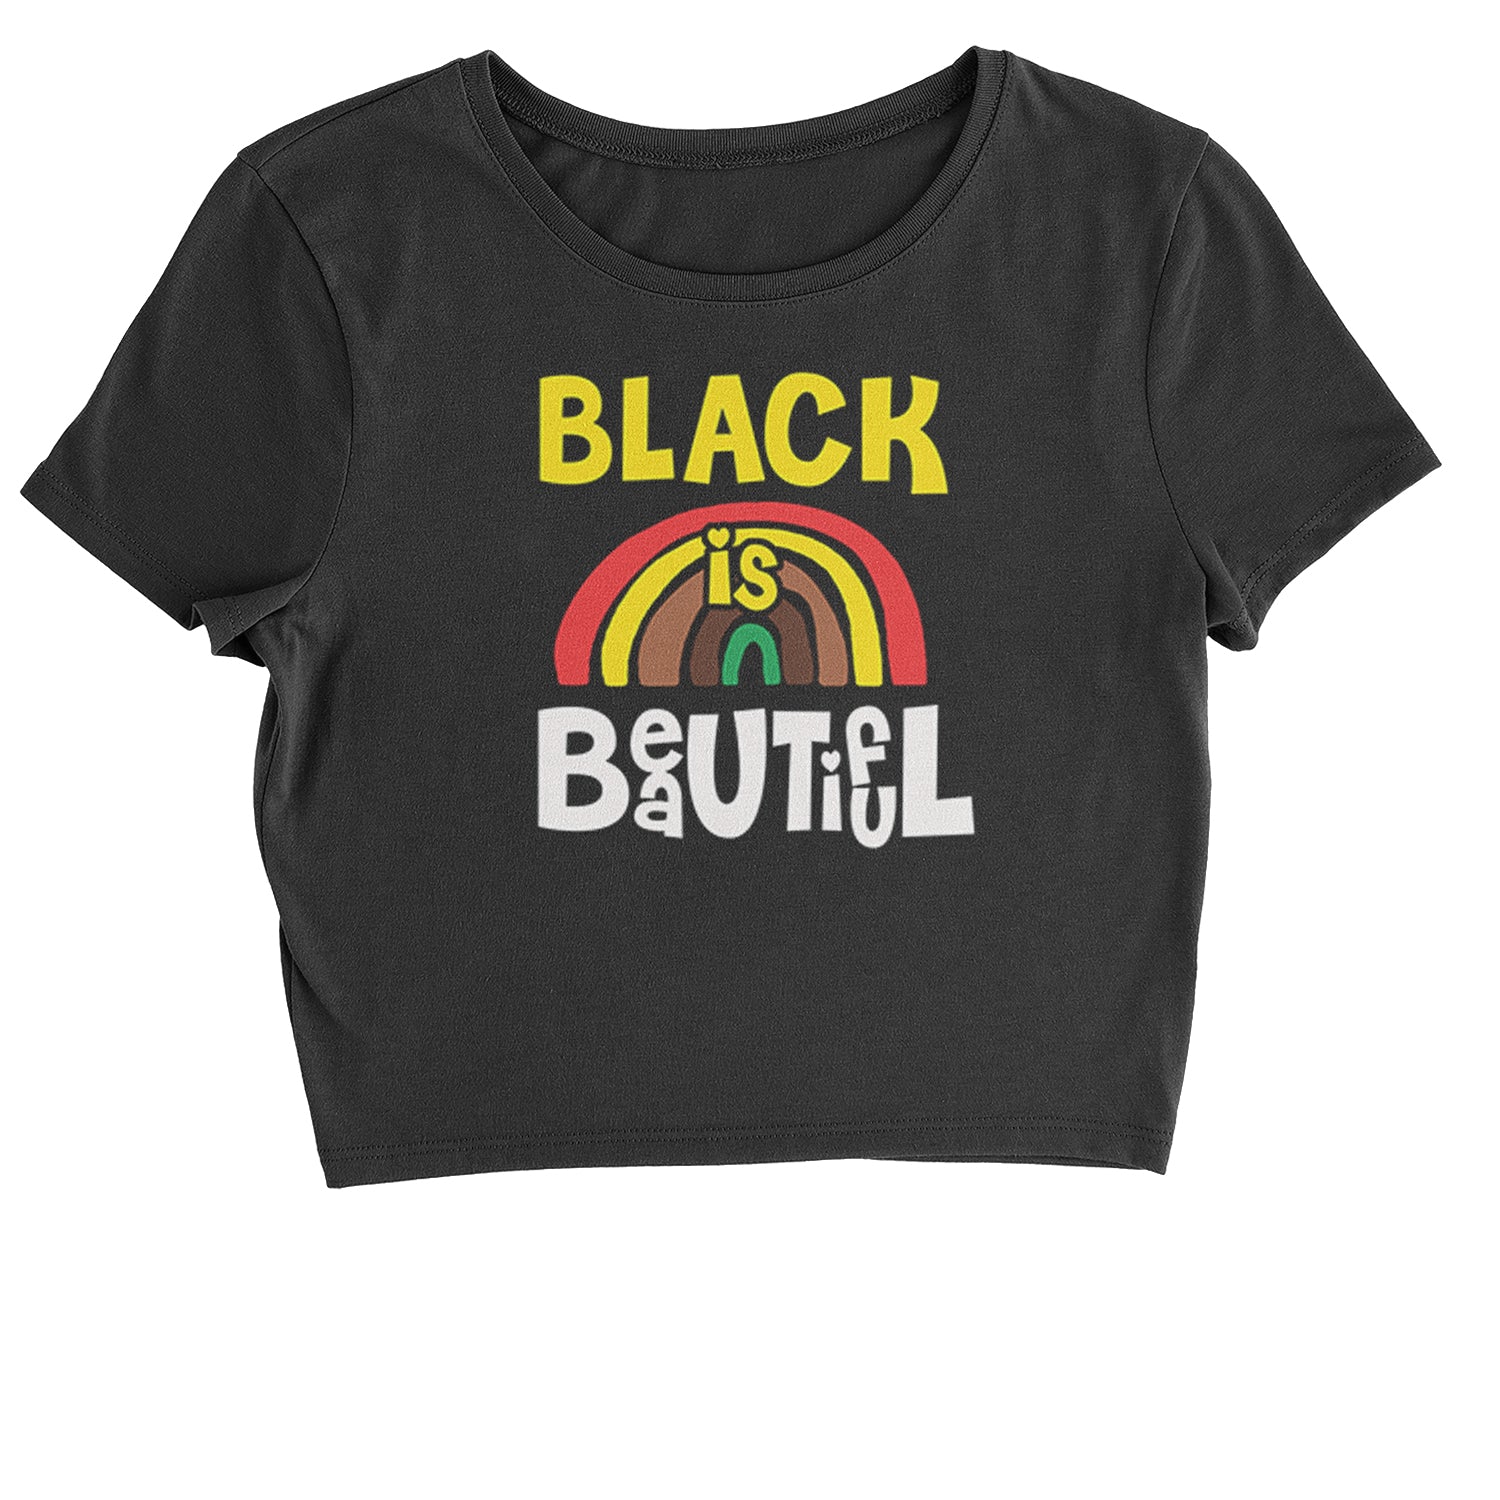 Black Is Beautiful Rainbow Cropped T-Shirt african, africanamerican, american, black, blackpride, blm, harriet, king, lives, luther, malcolm, march, martin, matter, parks, protest, rosa, tubman, x by Expression Tees